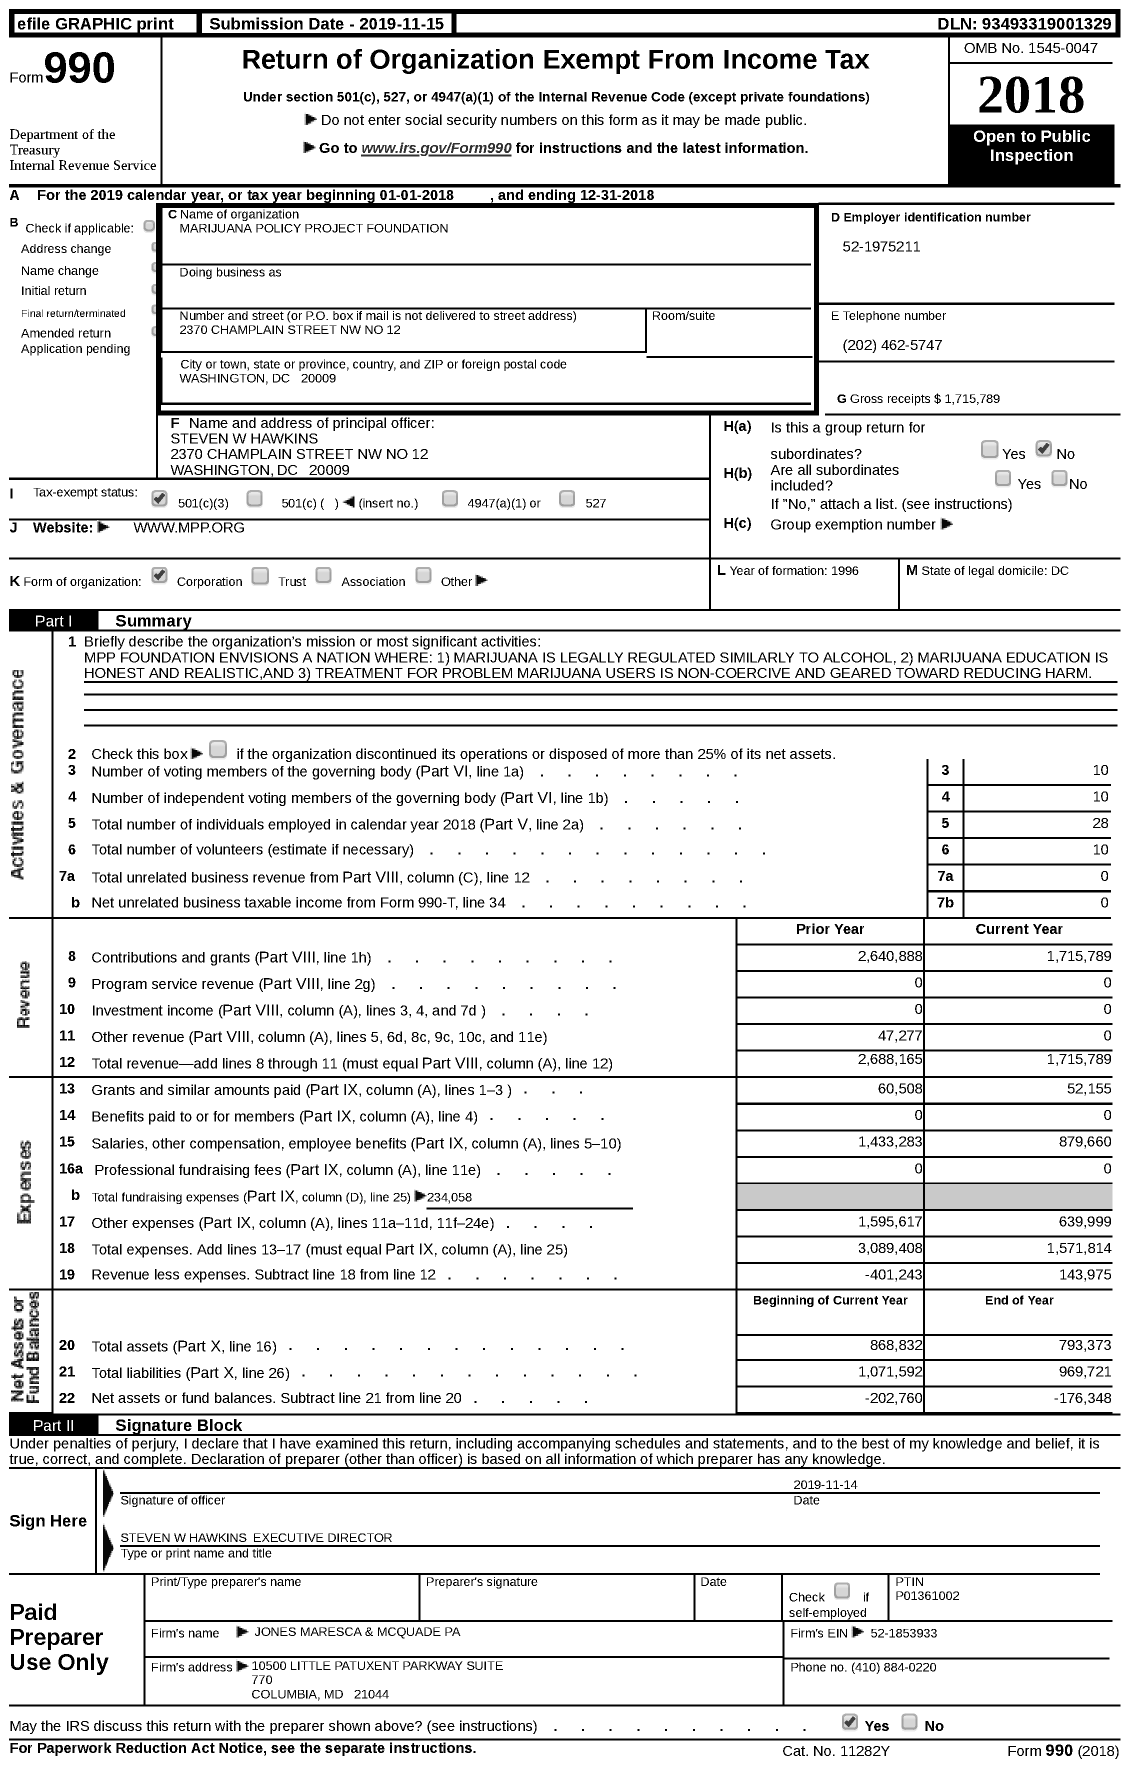 Image of first page of 2018 Form 990 for Marijuana Policy Project (MPP)